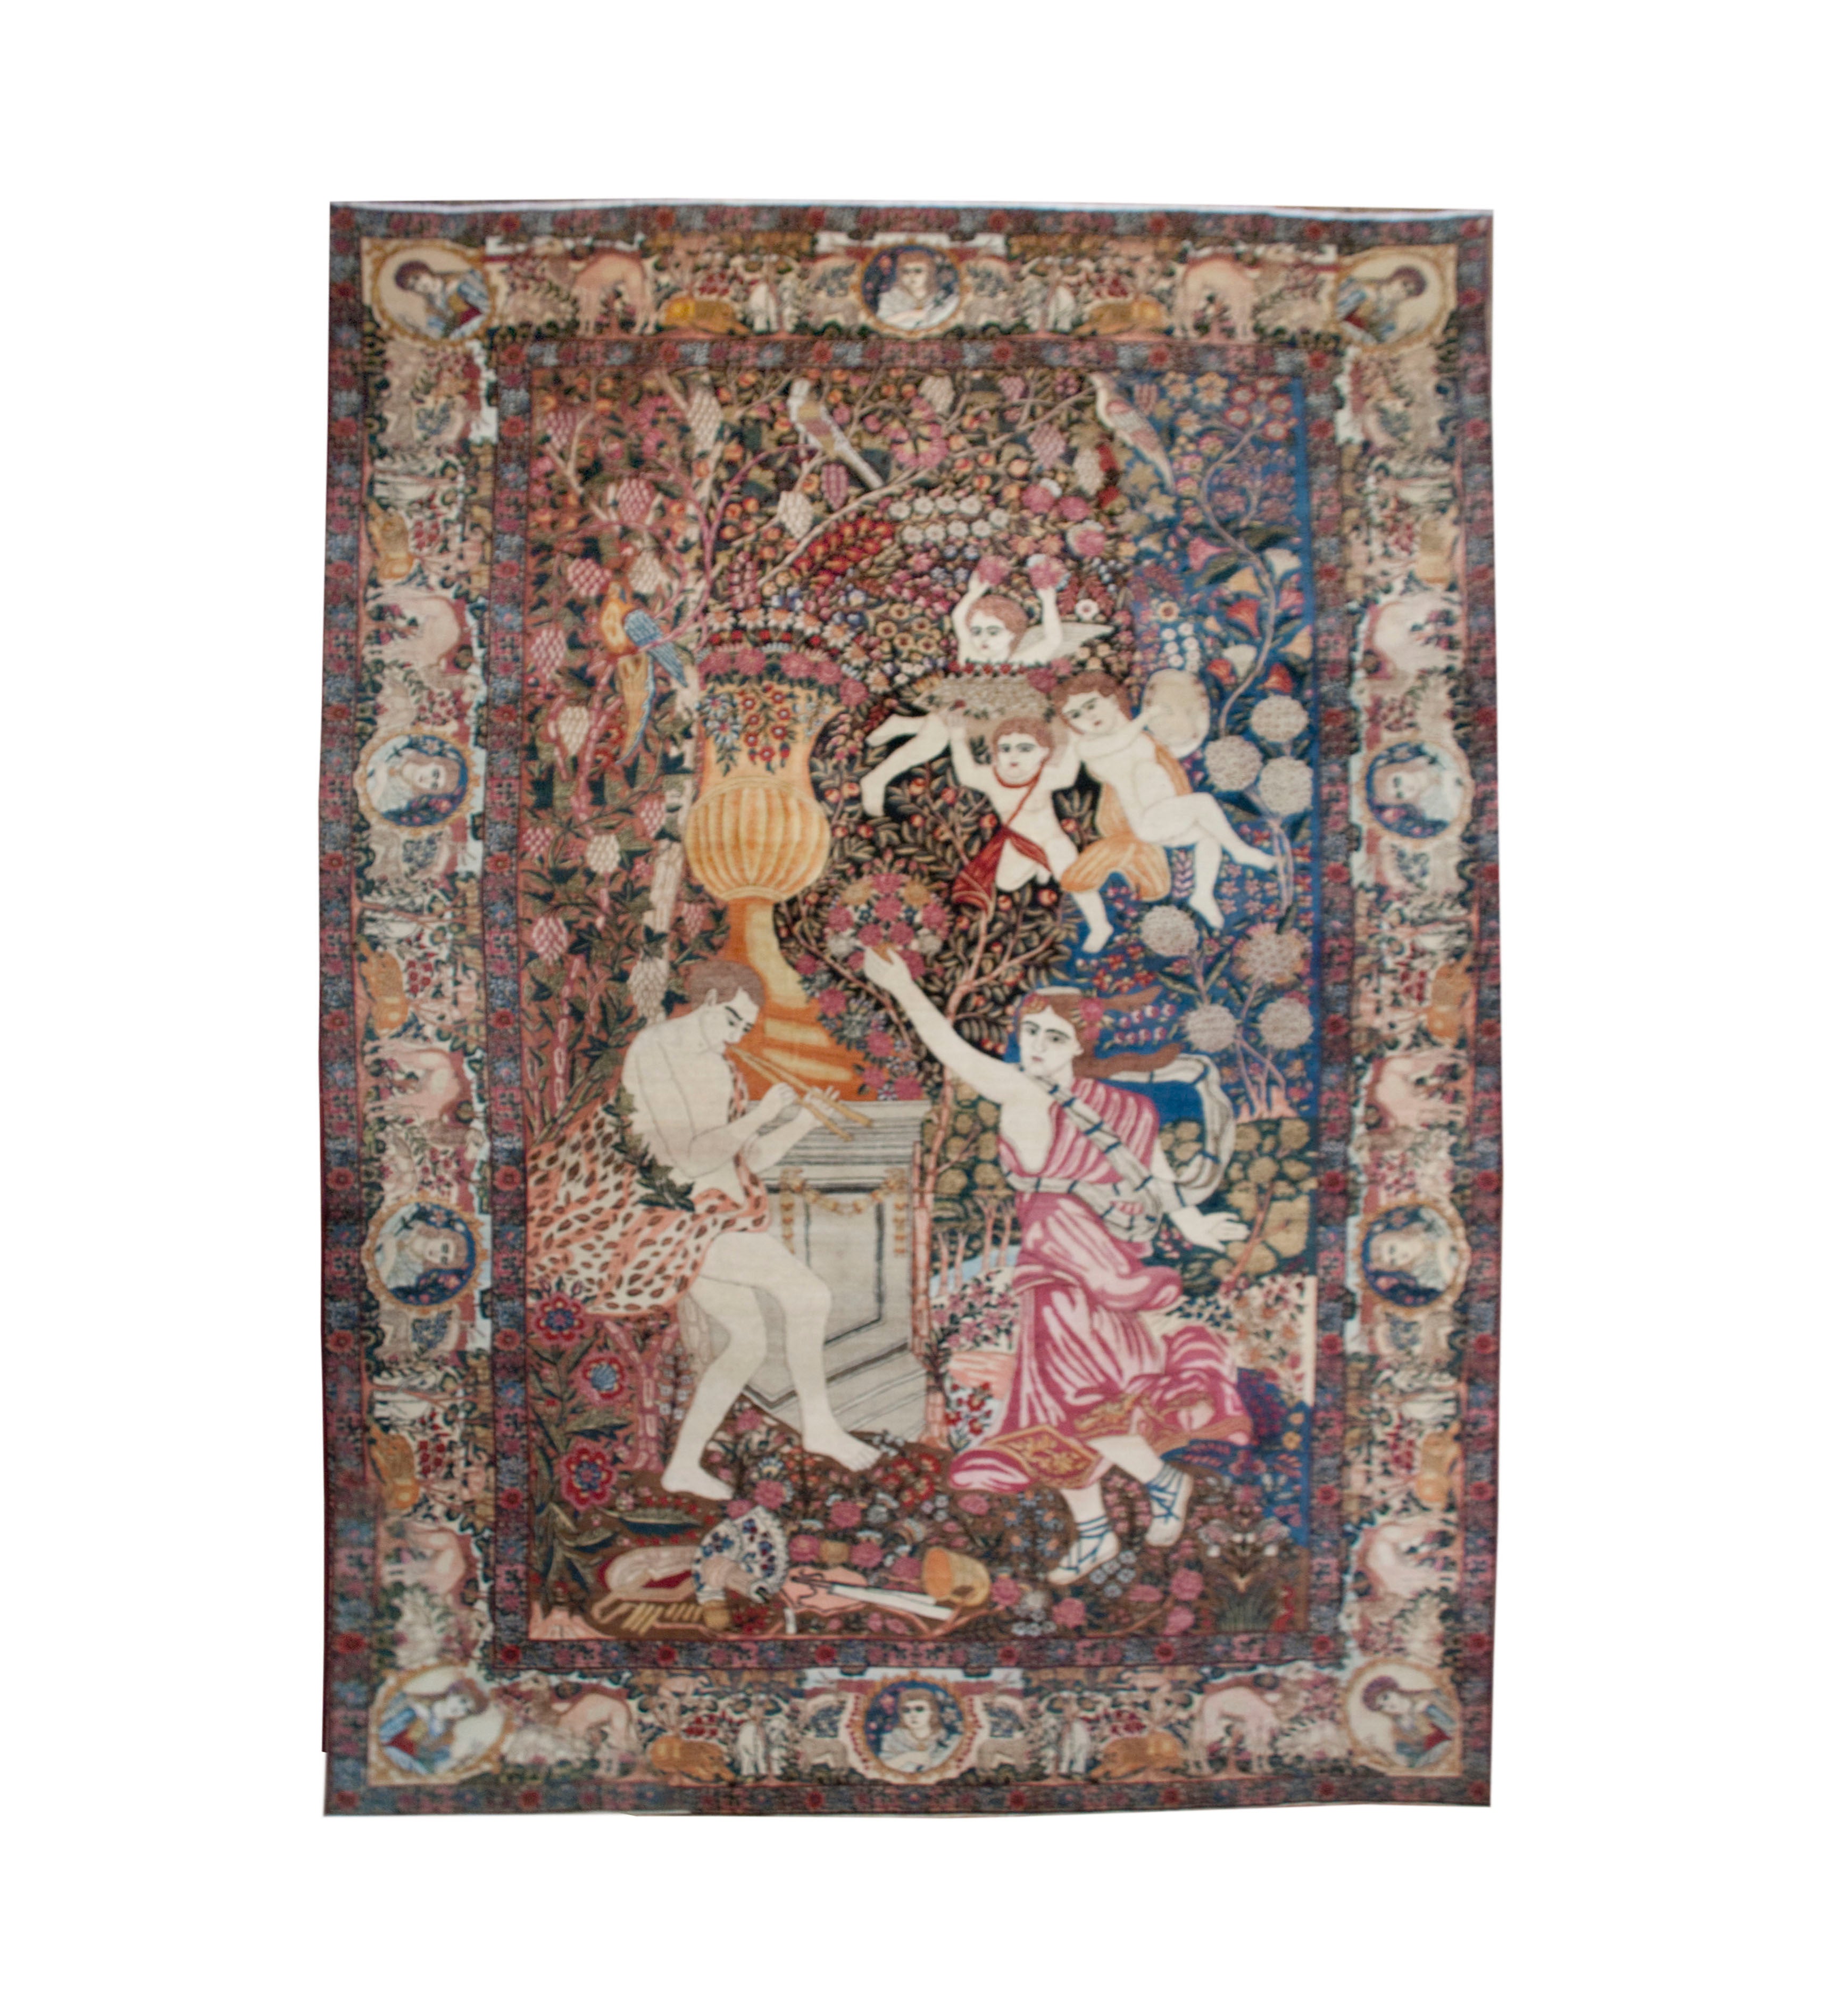 Unbelievable 19th Century Pictorial Kirman Lavar "Dance of the Nymphs" Rug